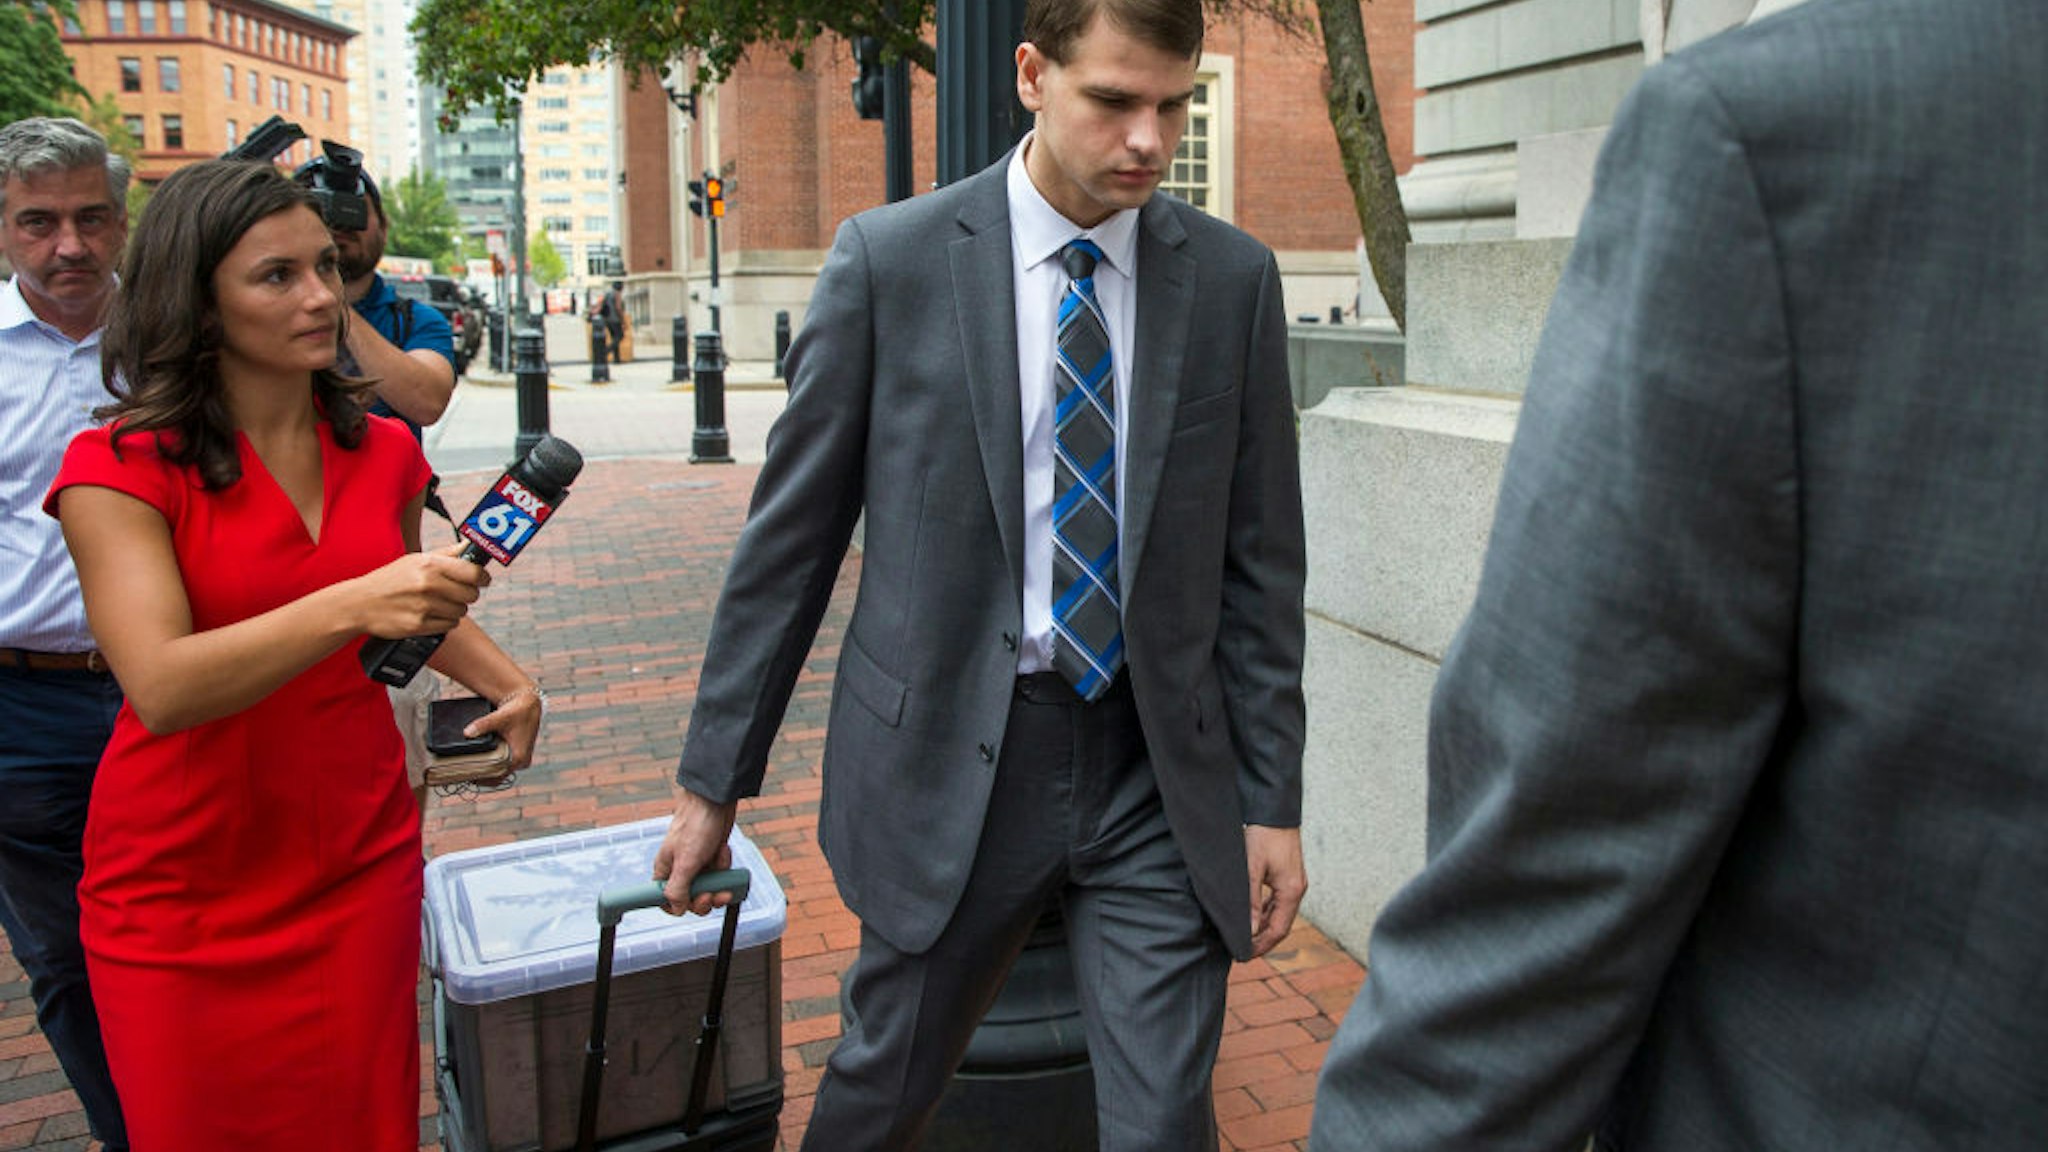 Nathan Carman ignores questions from the media upon his arrival at U.S. District Court for his federal civil trial in Providence, RI on Aug. 21, 2019.